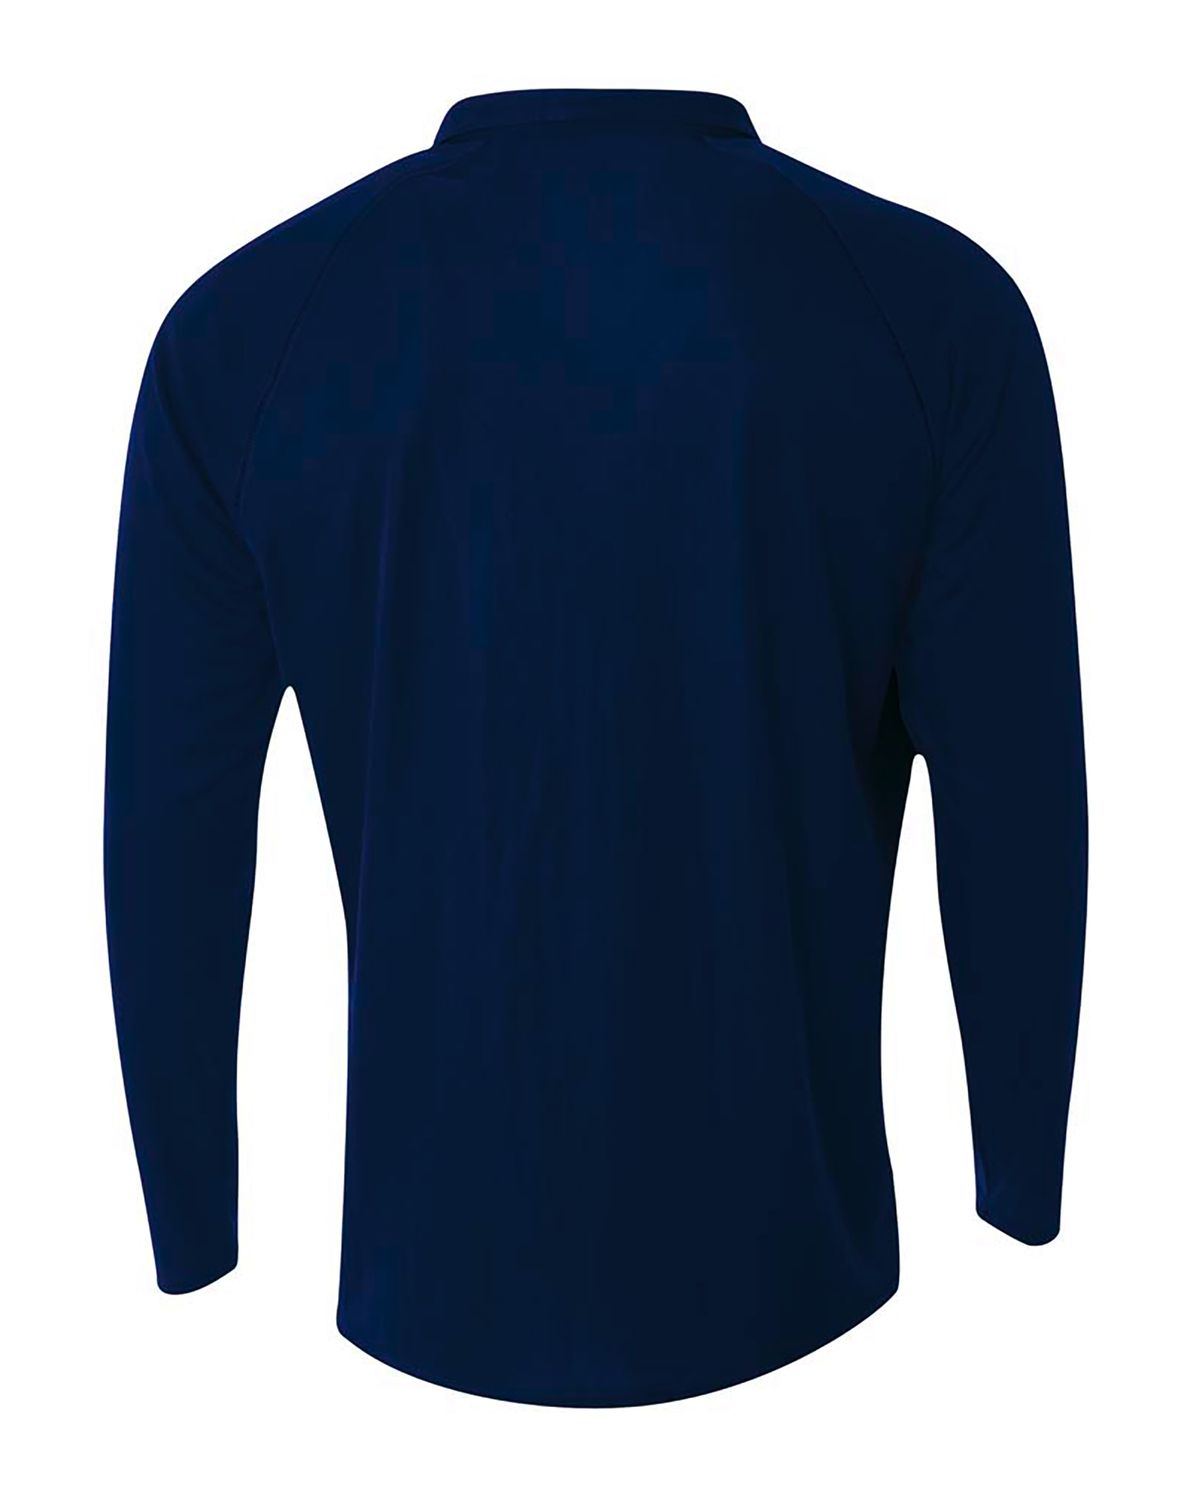 'A4 N4268 Adult Daily Polyester 1/4 Zip'